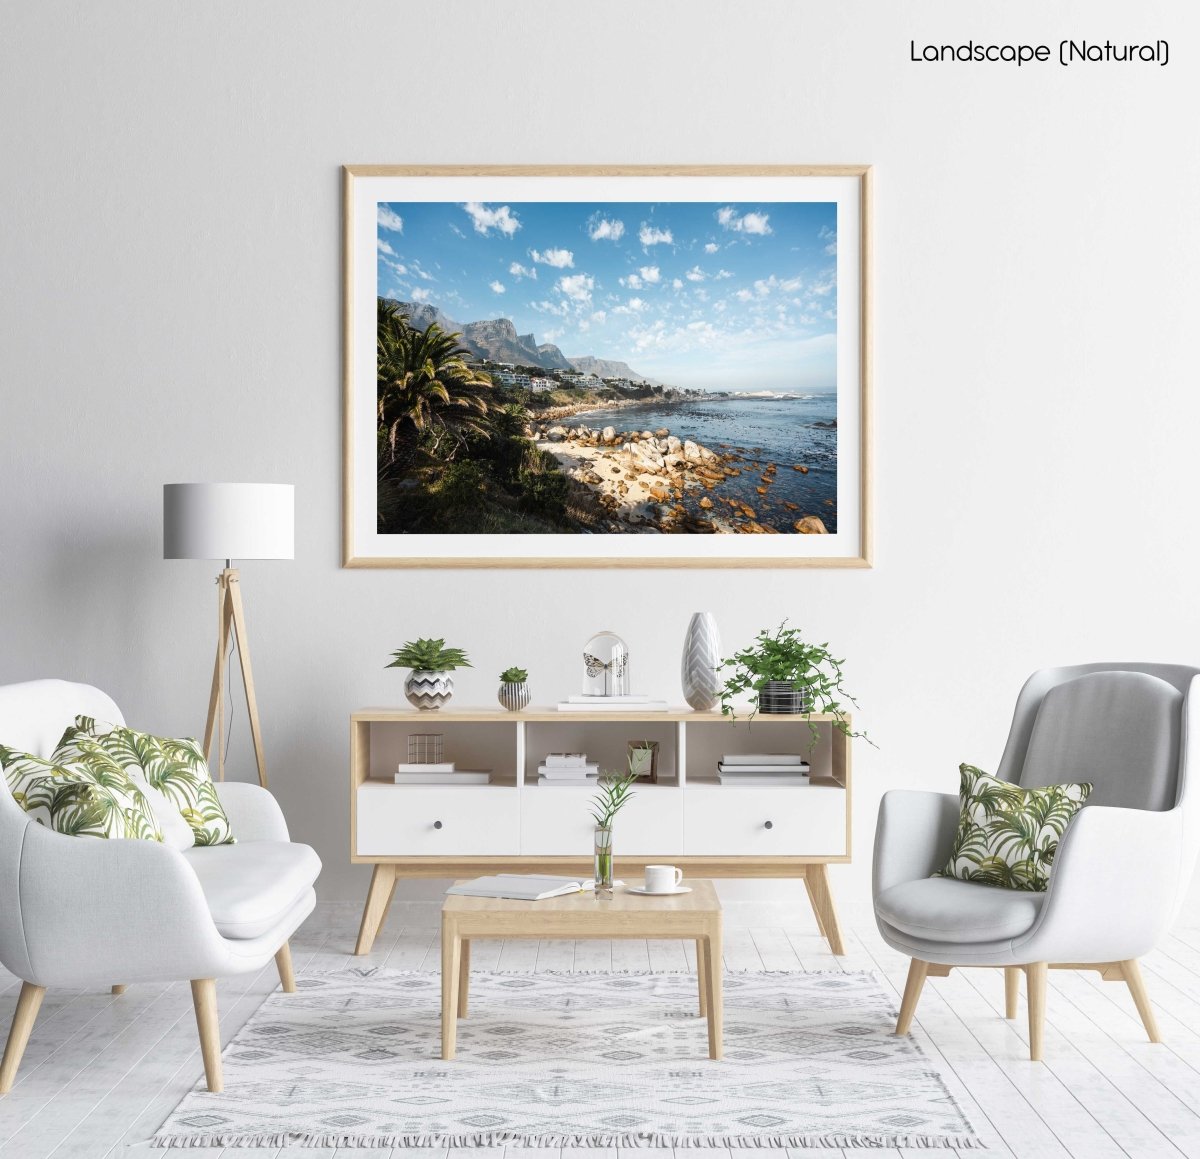 Barley Bay Beach and palm trees along Camps Bay in Cape Town in a natural fine art frame